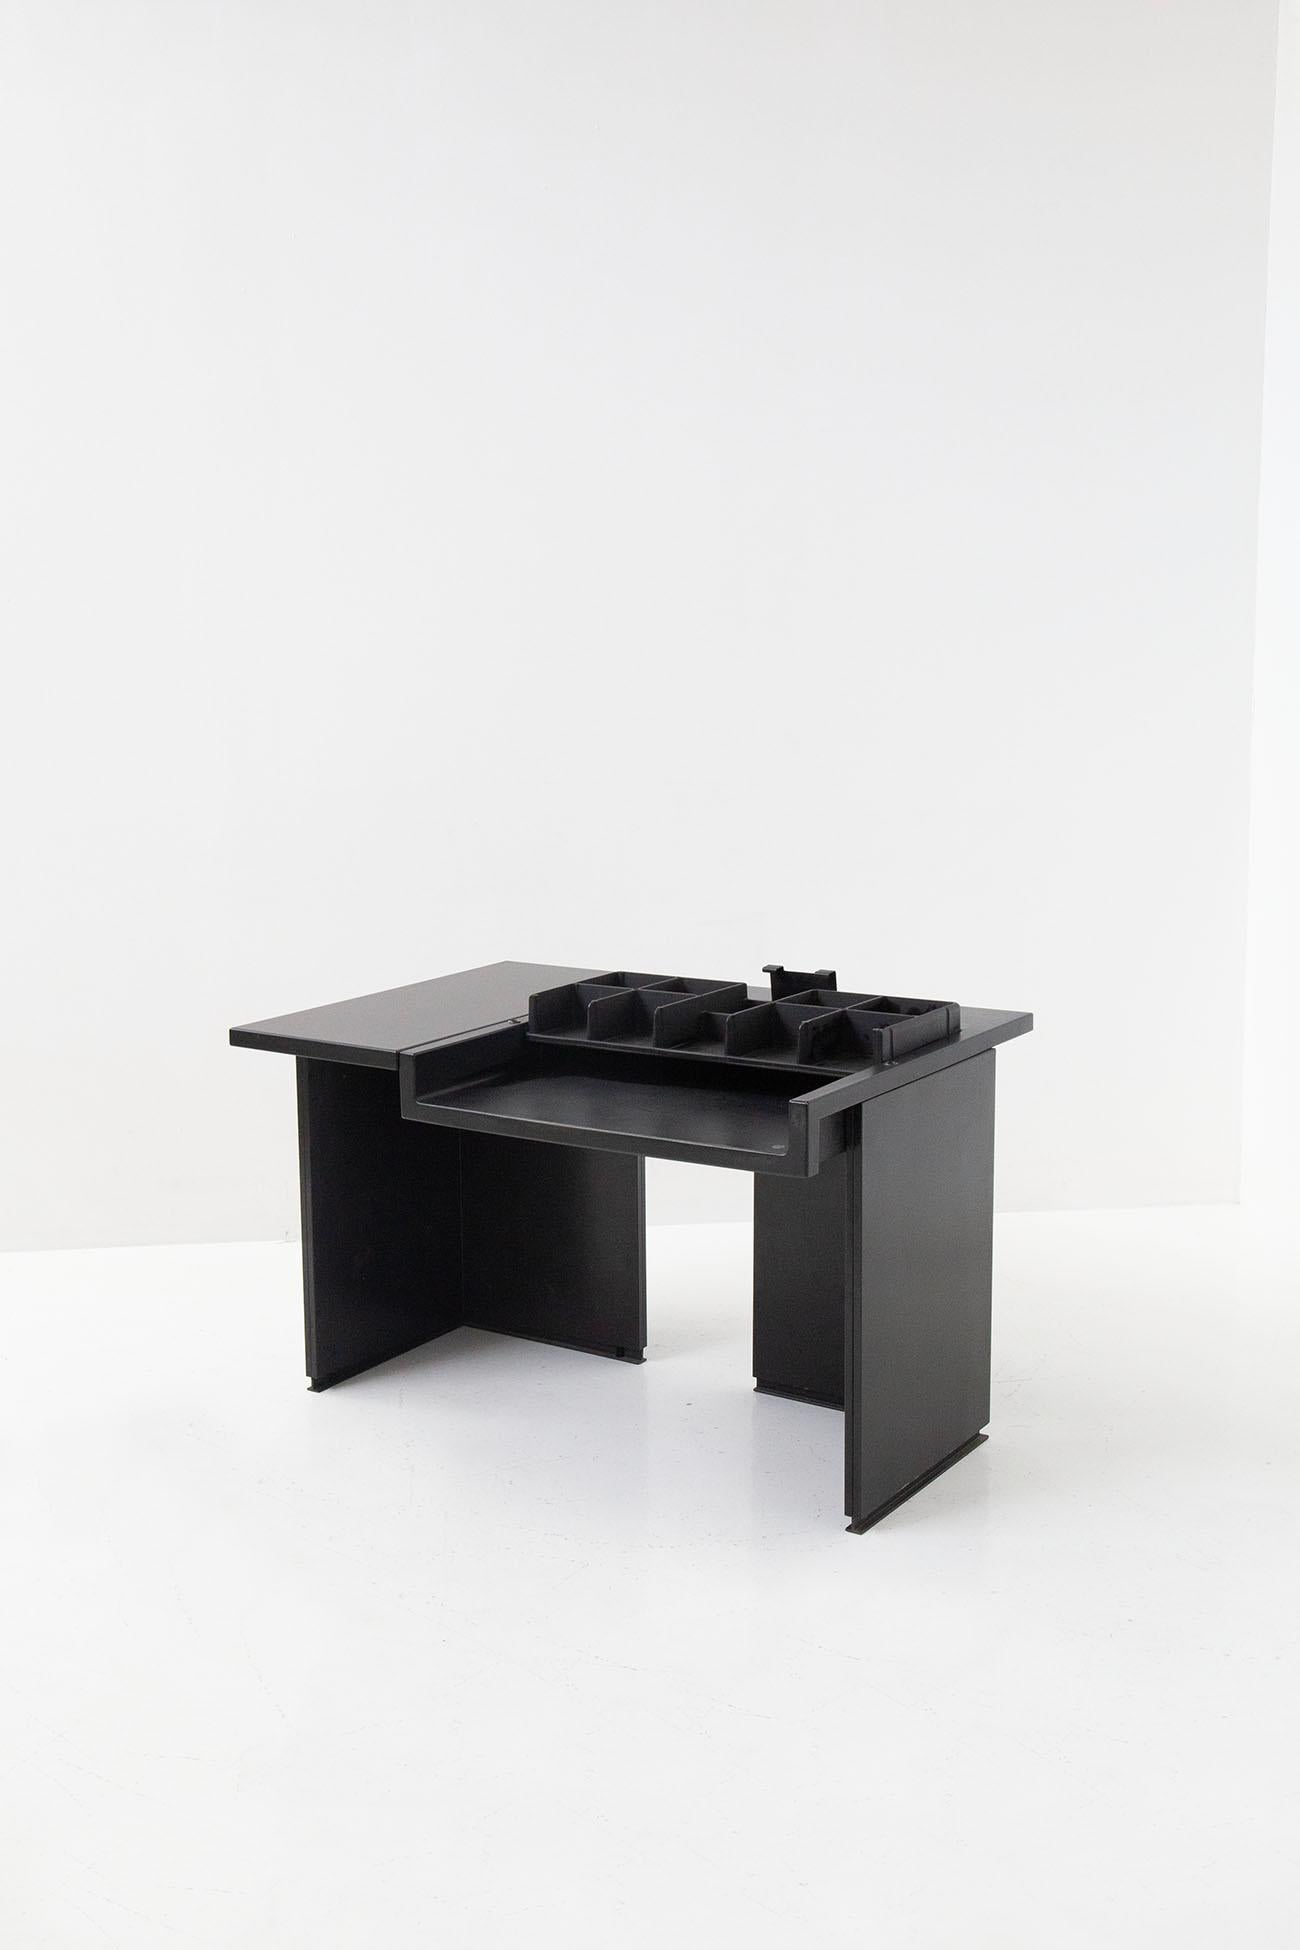 Beautiful desk Eugenio Gerli and Osvaldo Borsani designed the Graphis desk system for Tecno, Italy in 1968. The desk is part of a design for a modular system. This black desk is as simple as possible and is made of plastic with steel-metal feet and